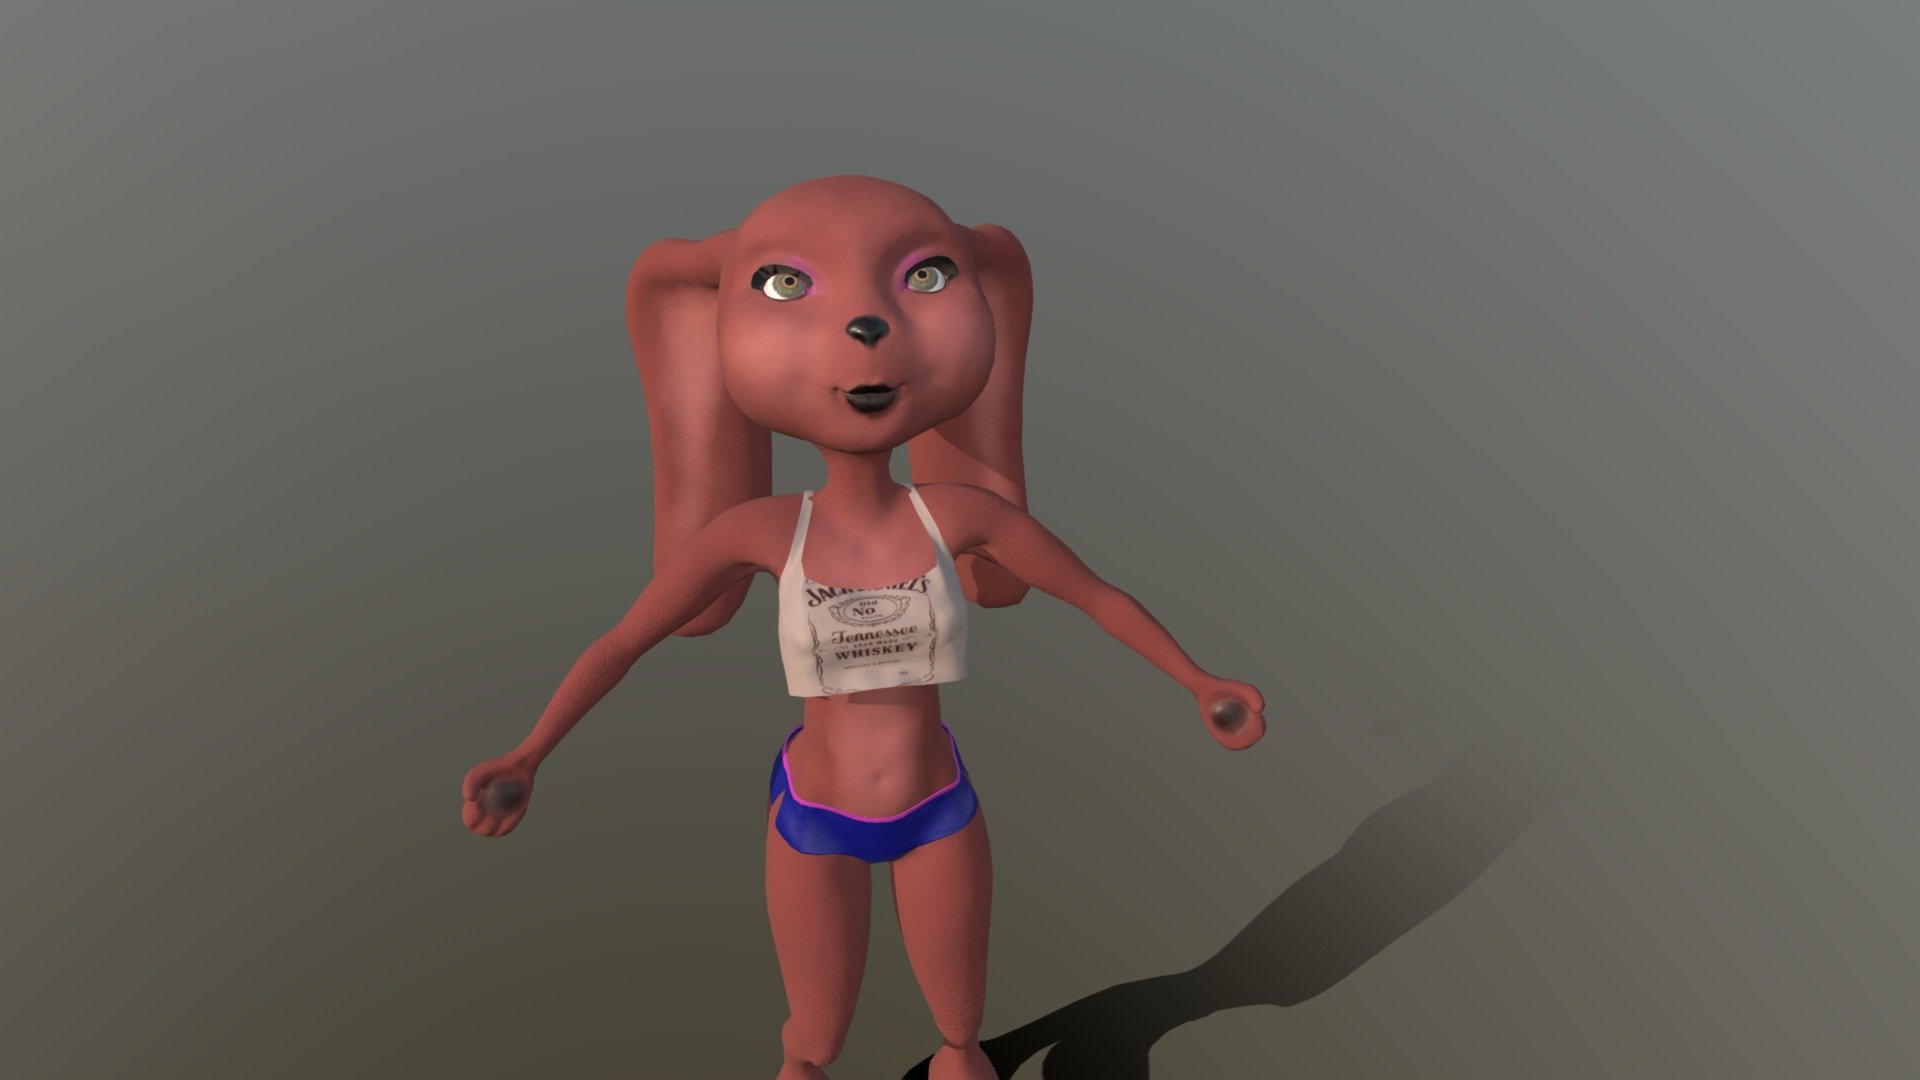 Stylised model of a sexy  bunny girl, she has been caught up in a life of crime&hellip; 

Its rigged with a humanoid armature, and she has a textured body under the clothes.
The model is a part of a pack 3d model